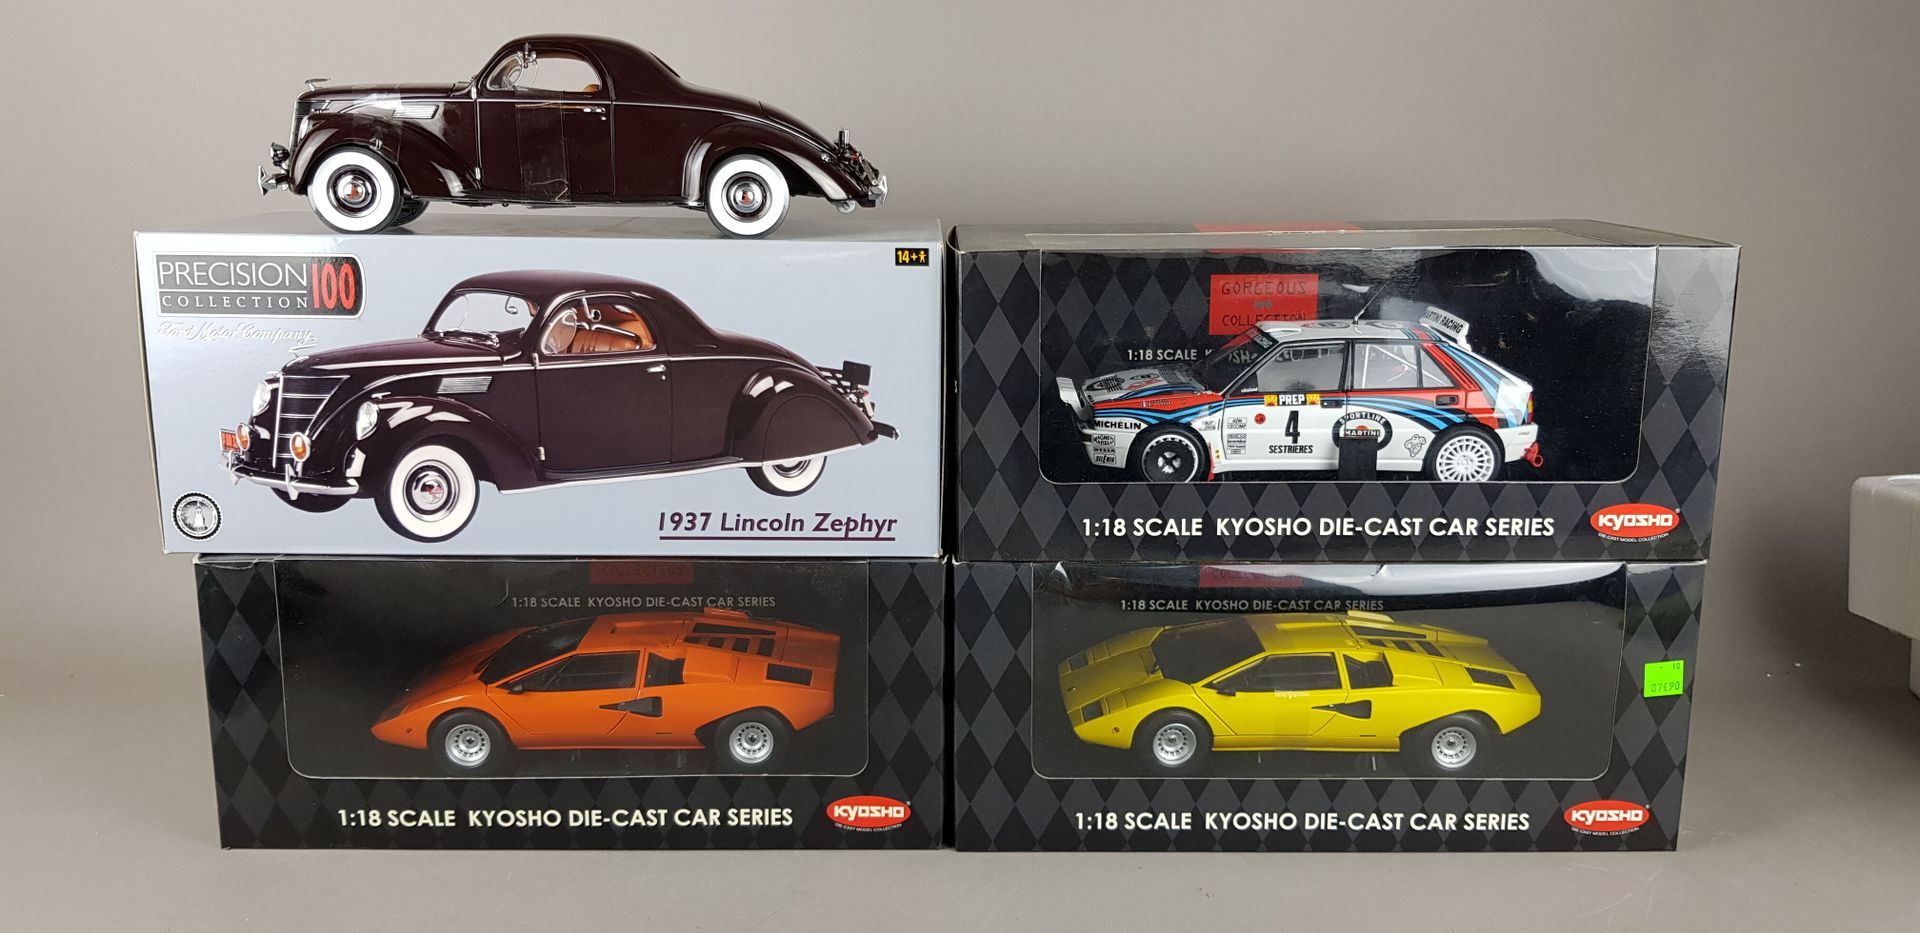 Null FOUR CARS scale 1/18 :

1x Precision Collection 100 Ford Motor Company 1937&hellip;